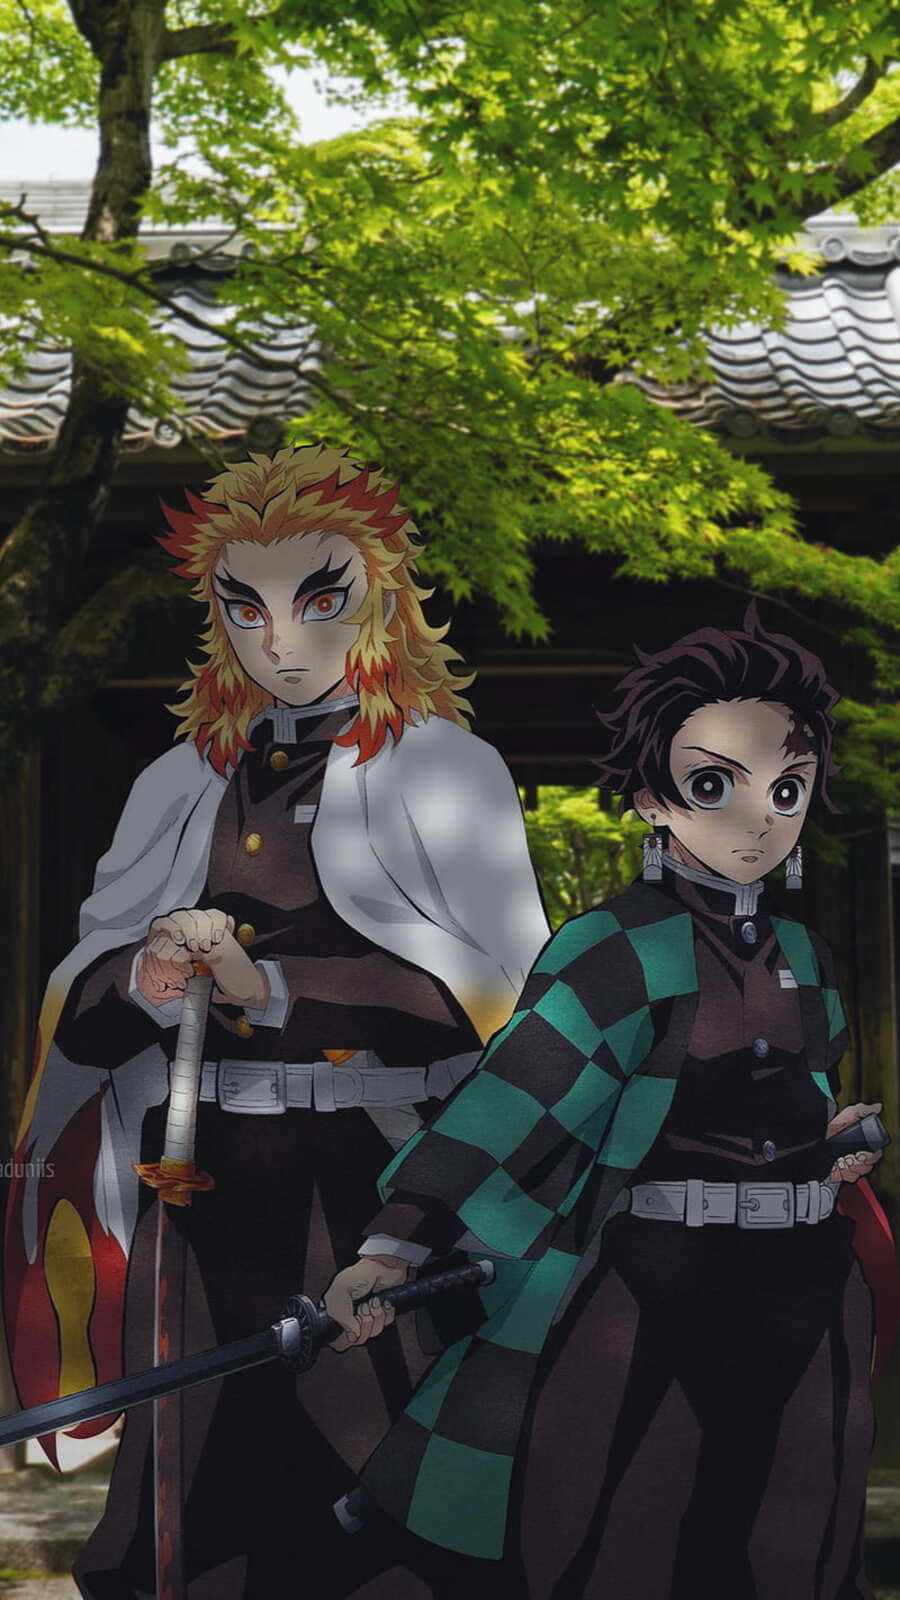 Rengoku and Tanjiro together in an epic action-filled moment Wallpaper